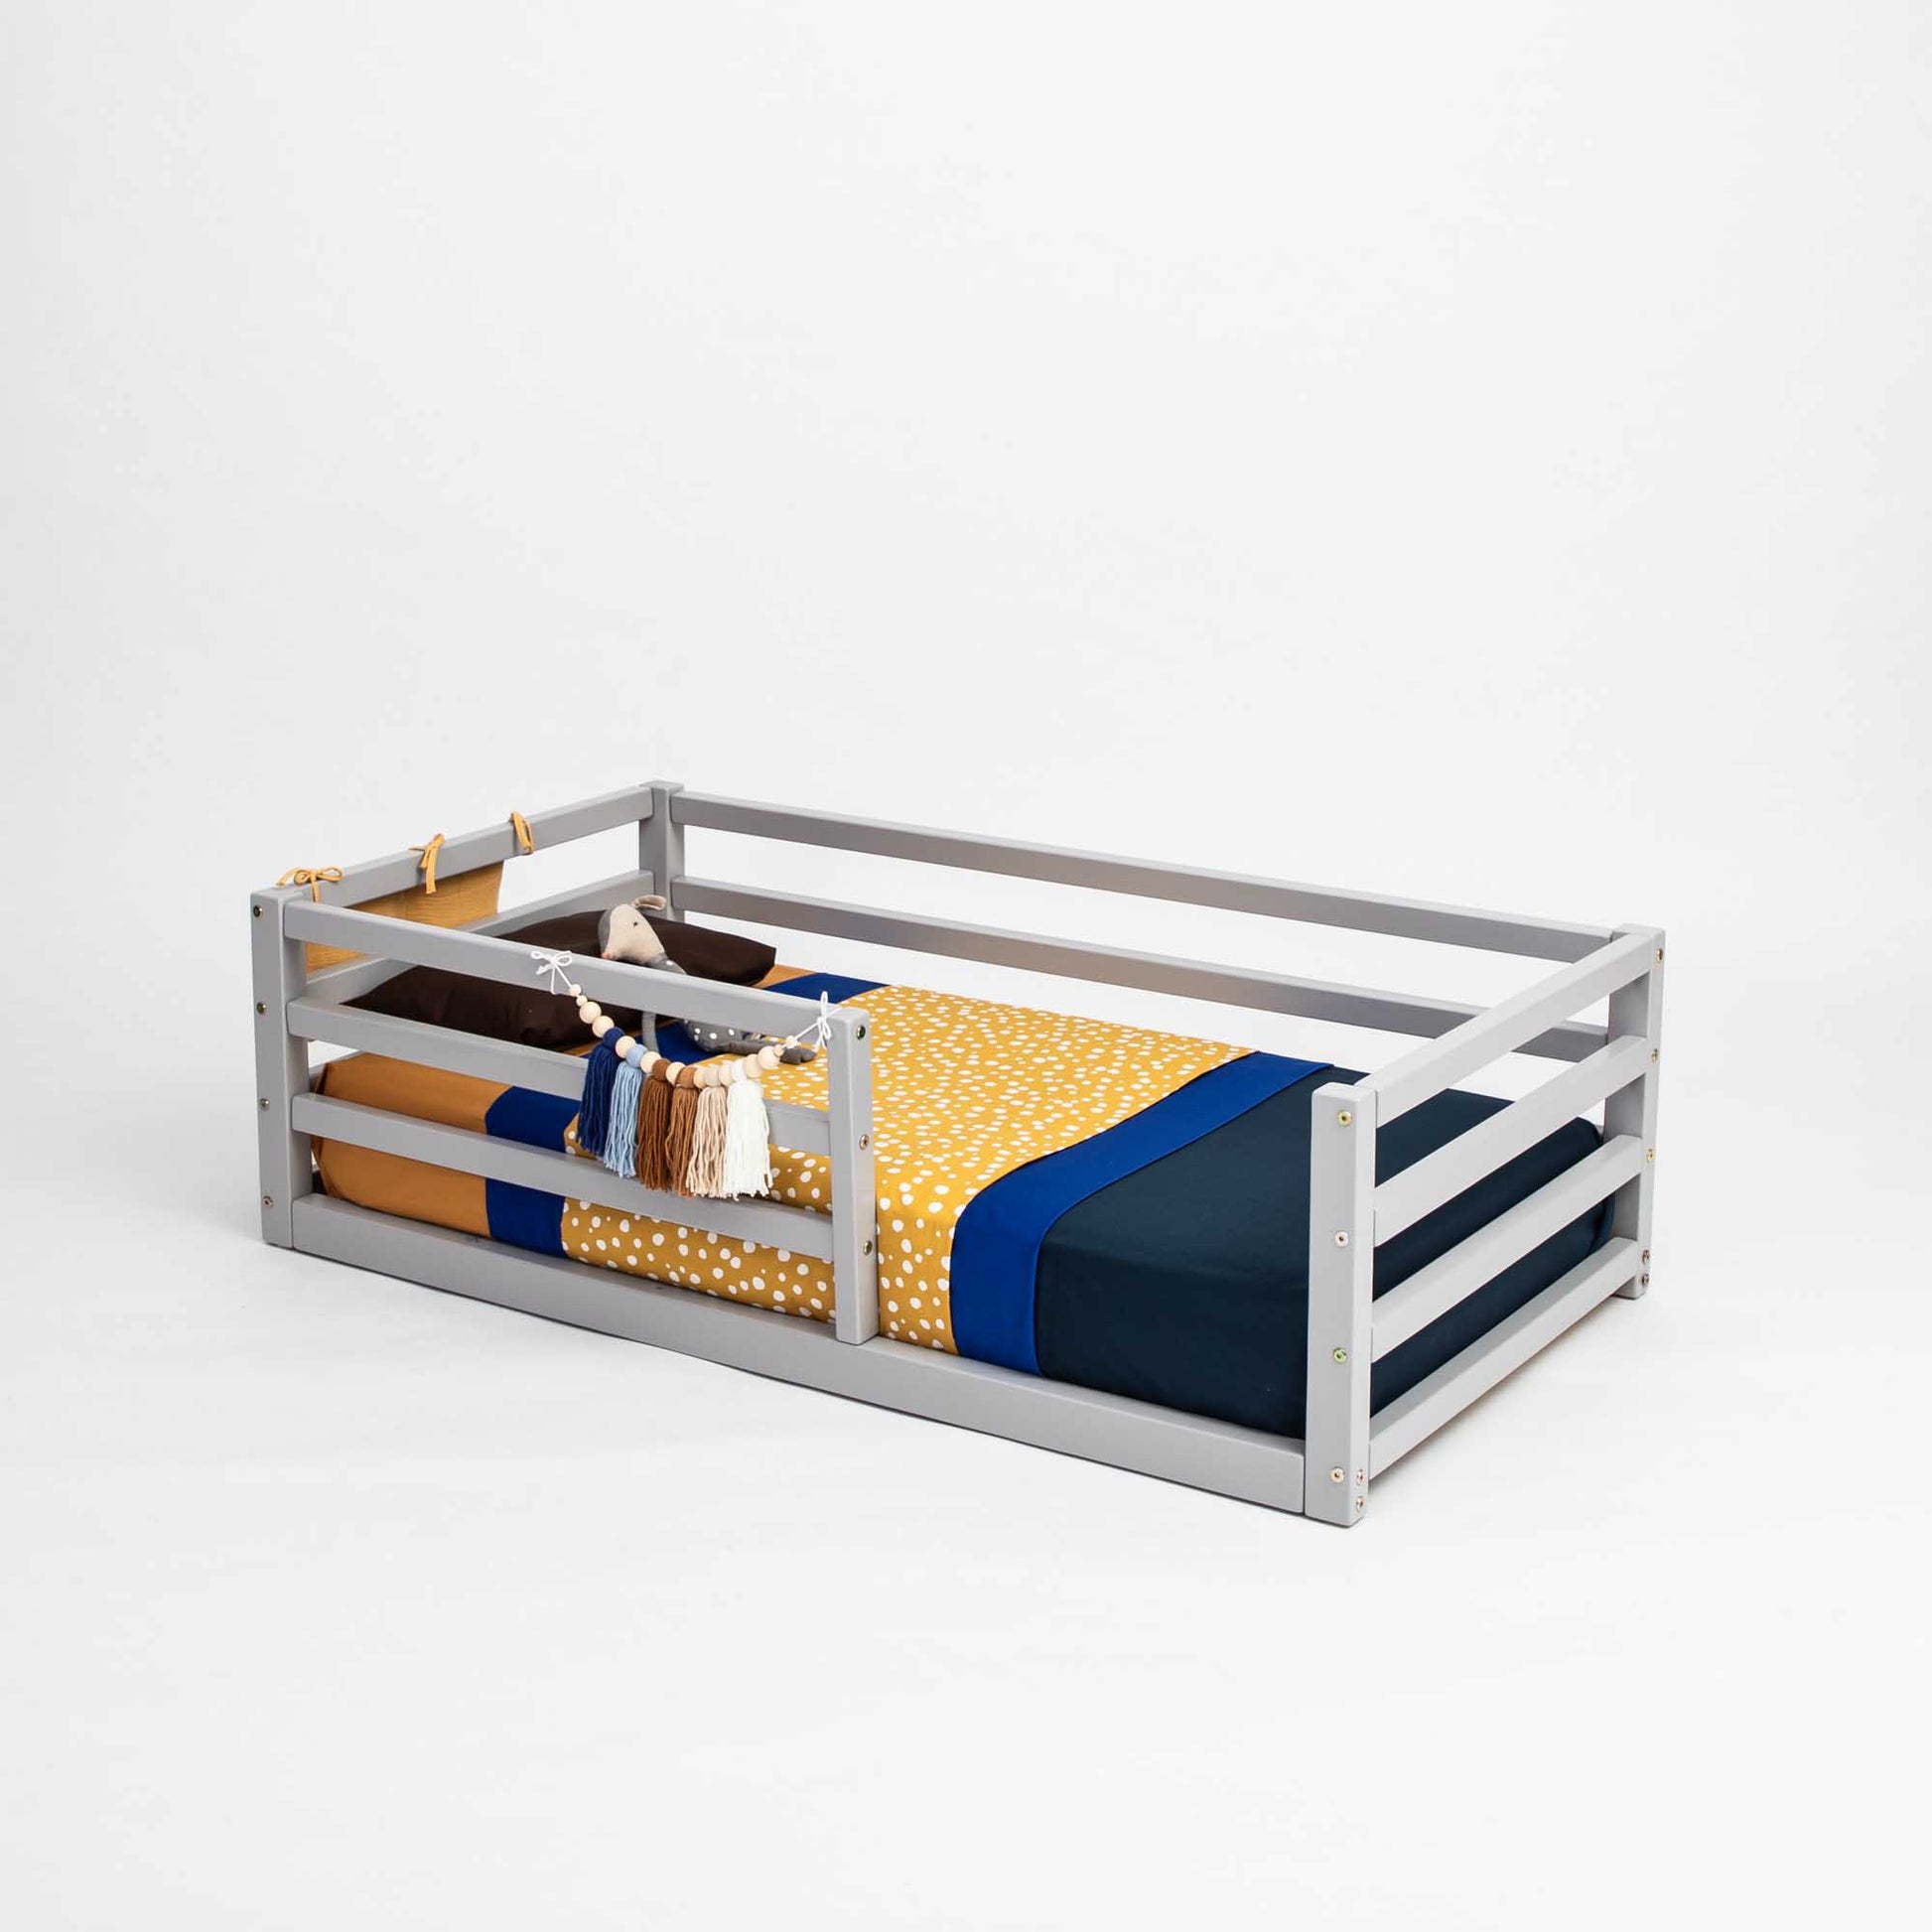 A 2-in-1 transformable kids' bed with a horizontal rail fence from Sweet Home From Wood, with a yellow and blue blanket.